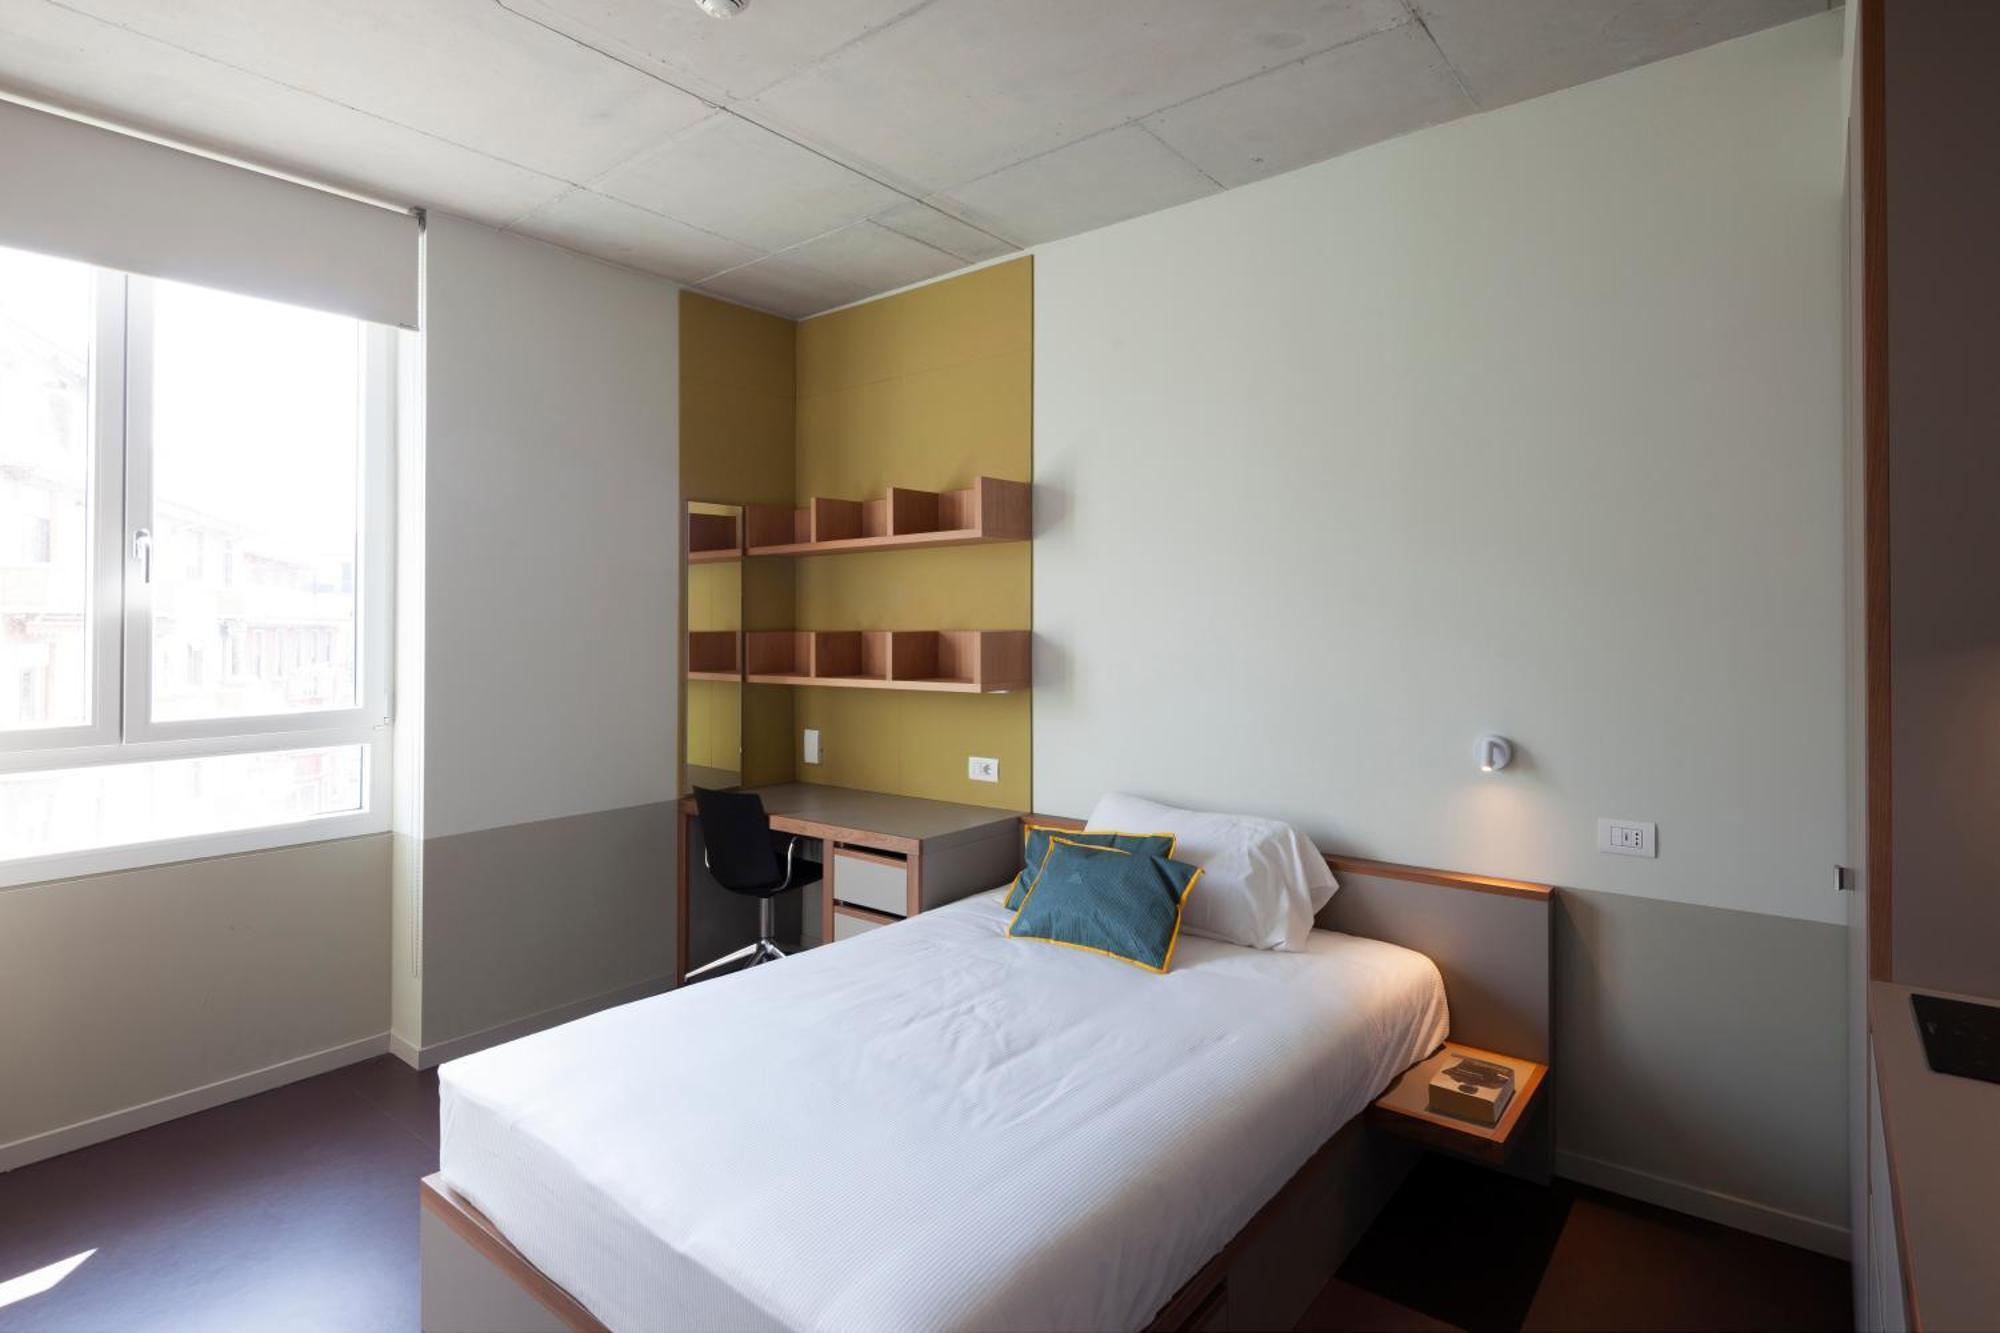 Giovenale Milan Navigli - Modern Rooms And Open Spaces In The Heart Of The City Экстерьер фото